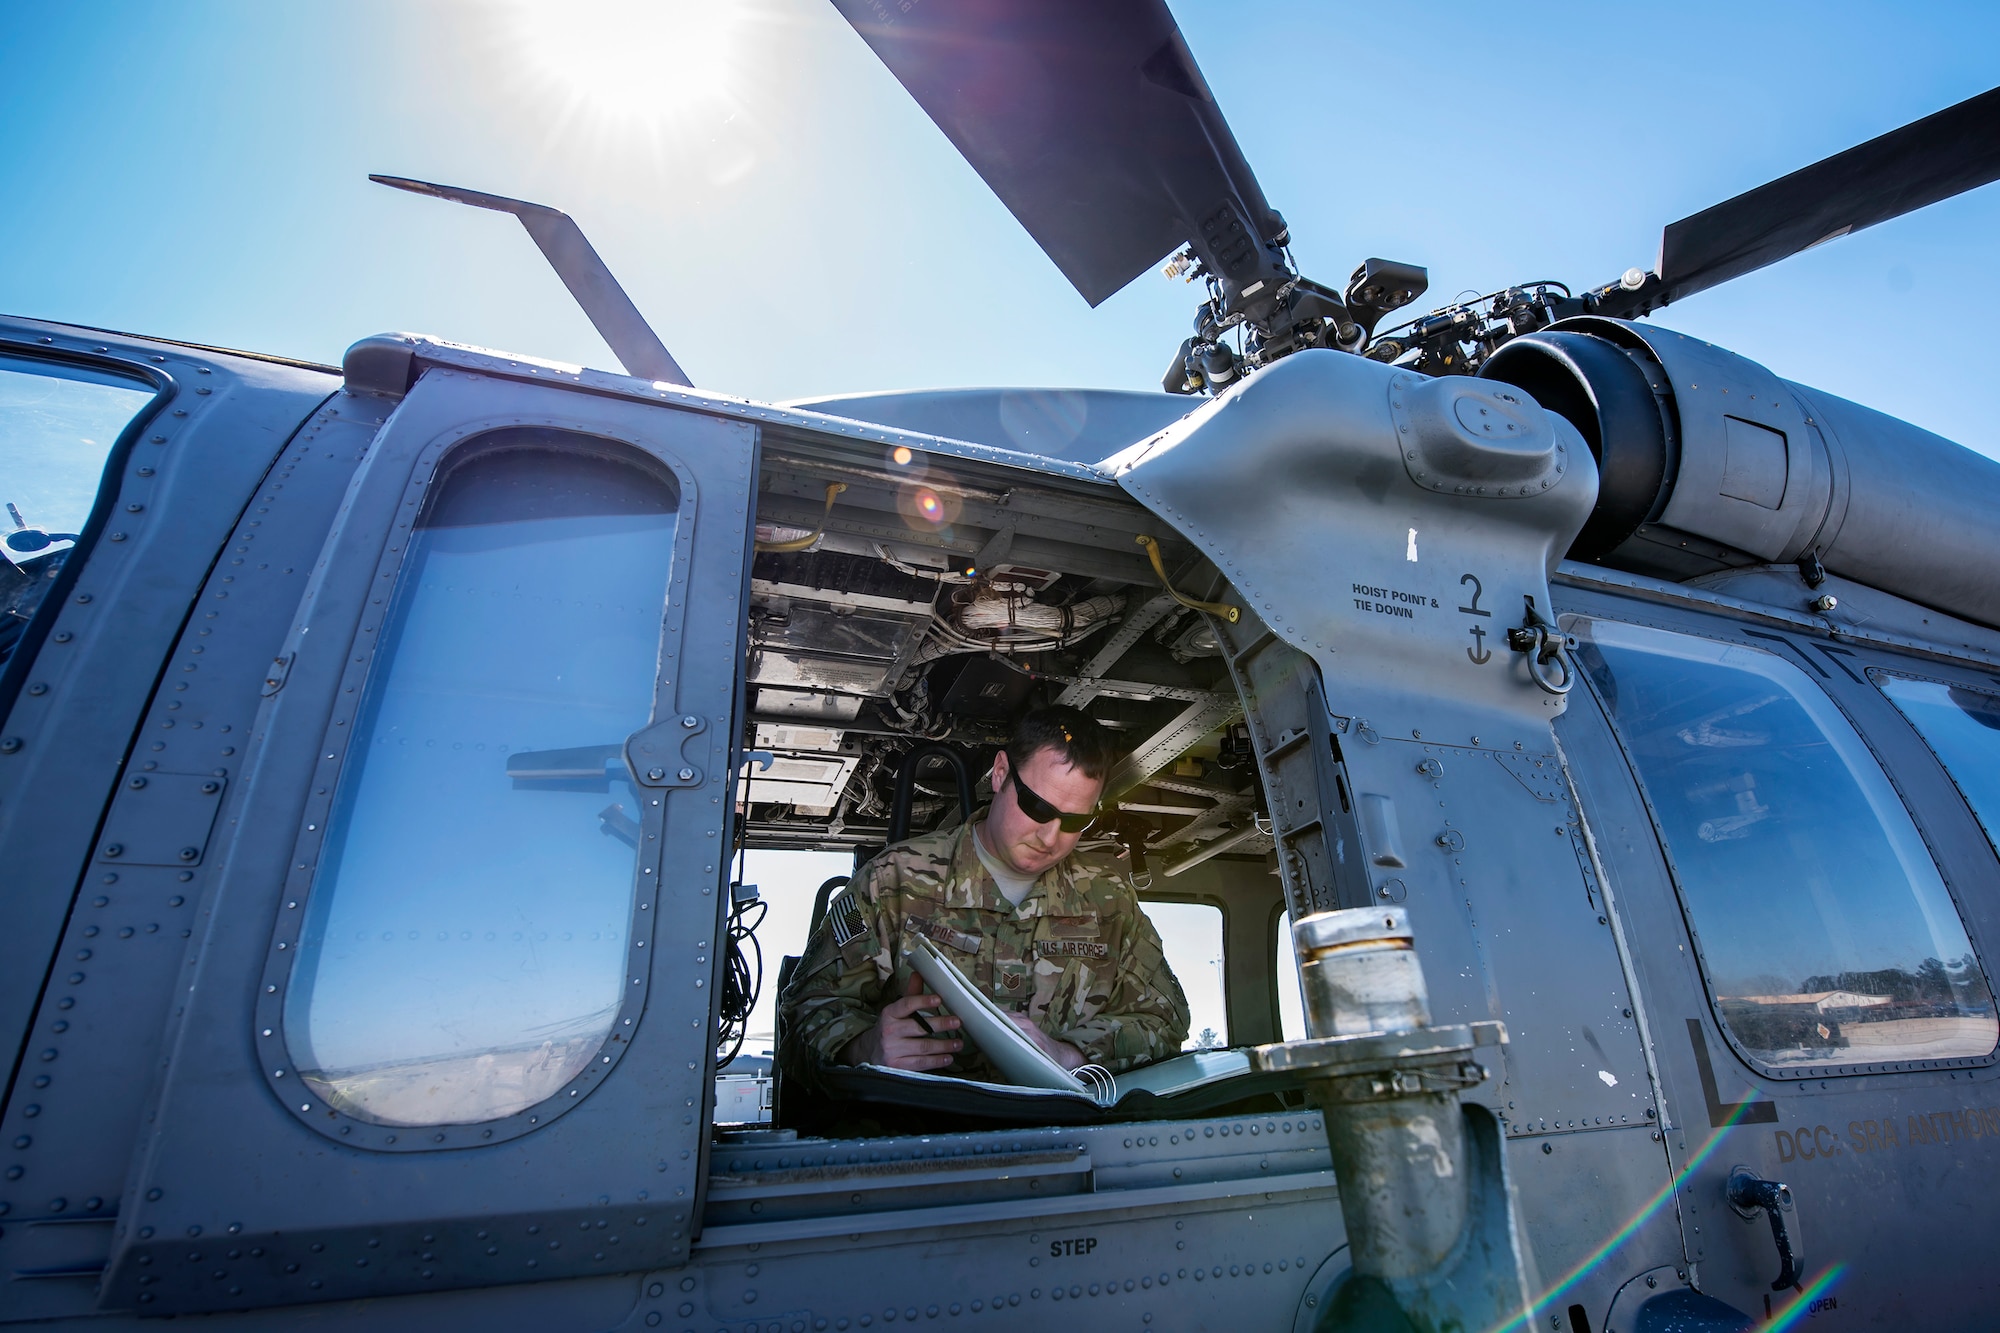 Tech. Sgt. Joshua Poe, 41st Rescue Squadron (RQS) special missions aviator, reads a flight plan, March 15, 2018, at Moody Air Force Base, Ga. Airmen from the 41st RQS and 723d Aircraft Maintenance Squadron conducted pre-flight checks to ensure that an HH-60G Pave Hawk was fully prepared for a simulated combat search and rescue mission. (U.S. Air Force photo by Airman Eugene Oliver)